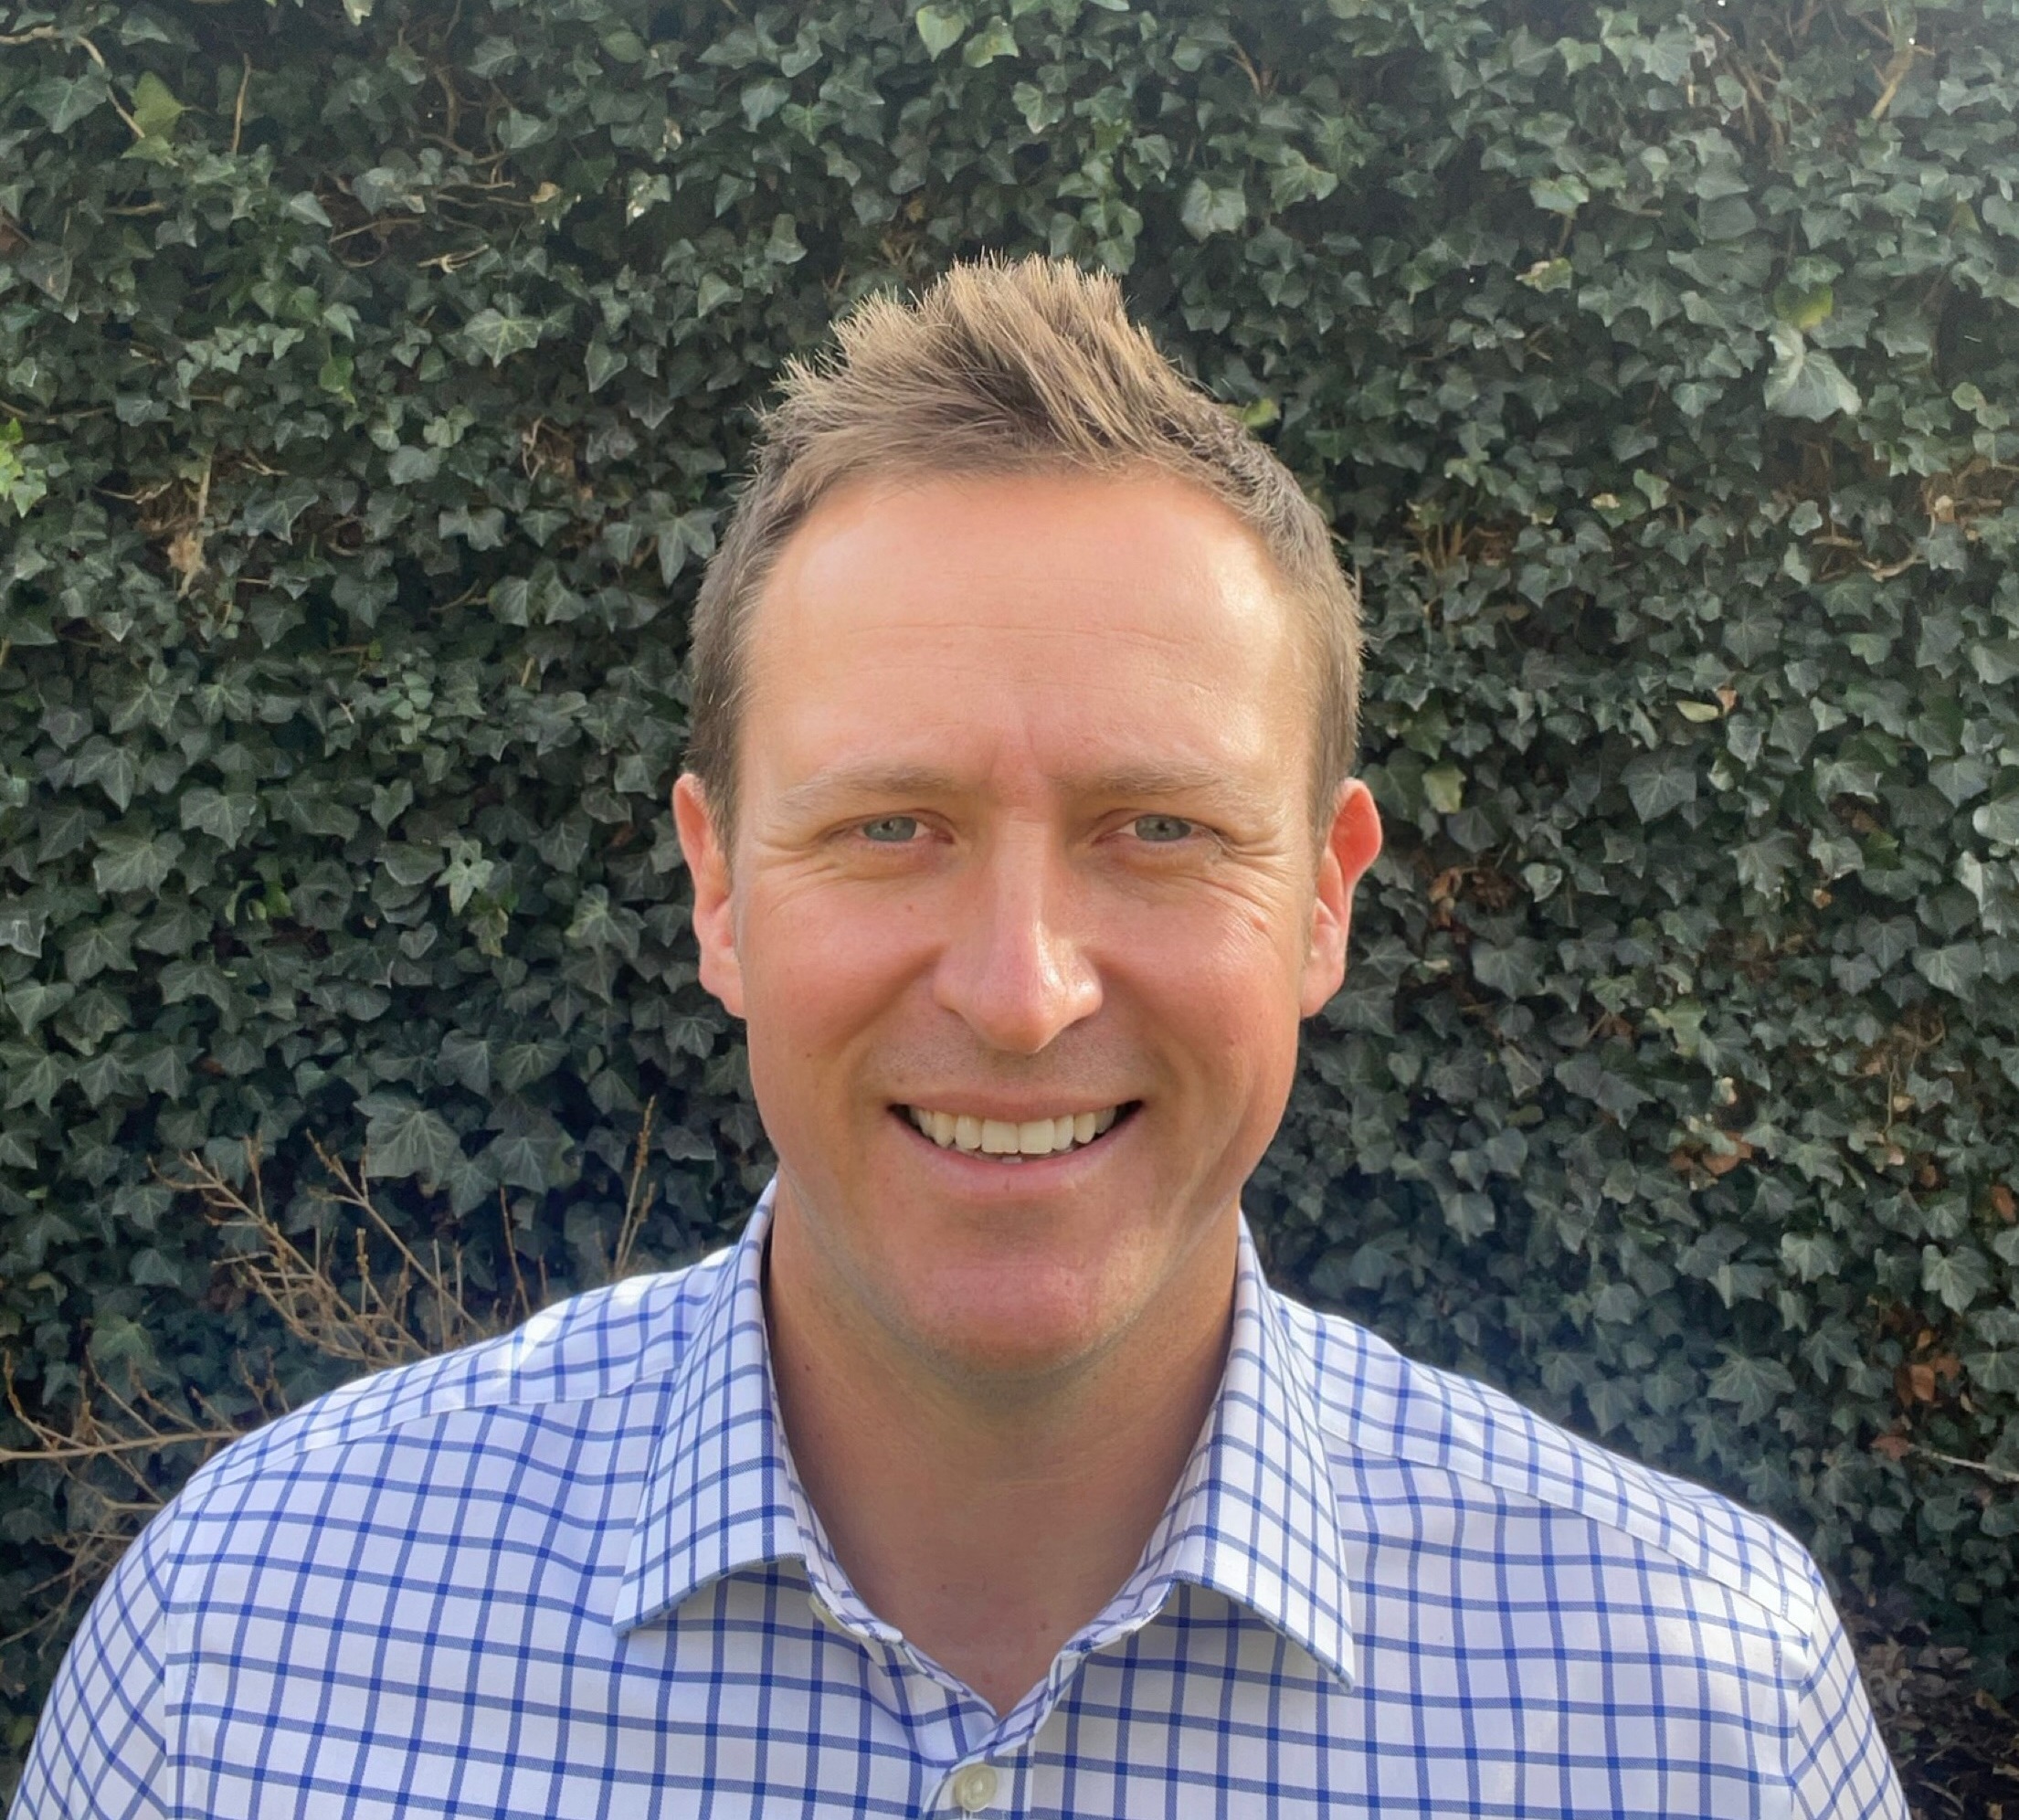 We are delighted to welcome Phil Monkman to the newly created role of Head of Customer Sustainability as part of our ongoing commitment to improving environmental and operational efficiency within the supply chain.